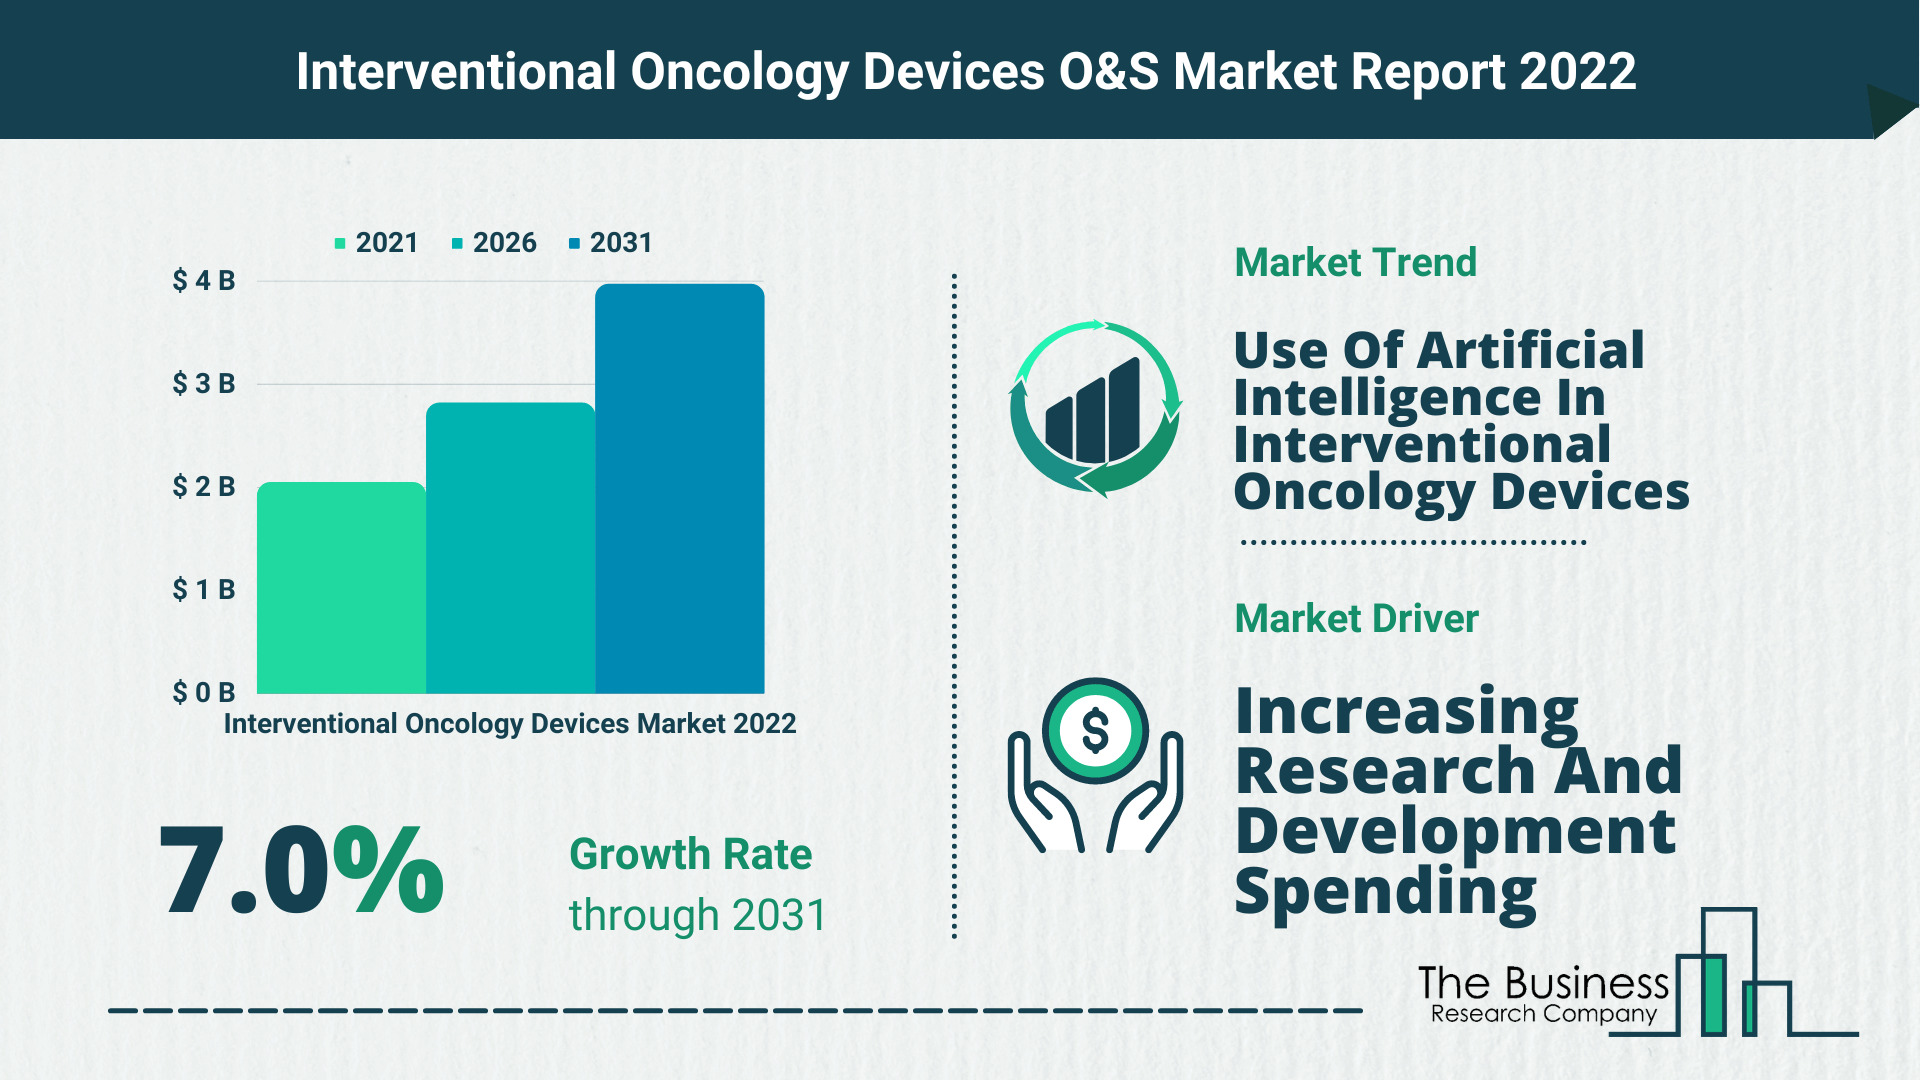 Interventional Oncology Devices Market Growth Analysis Till 2030 By The Business Research Company